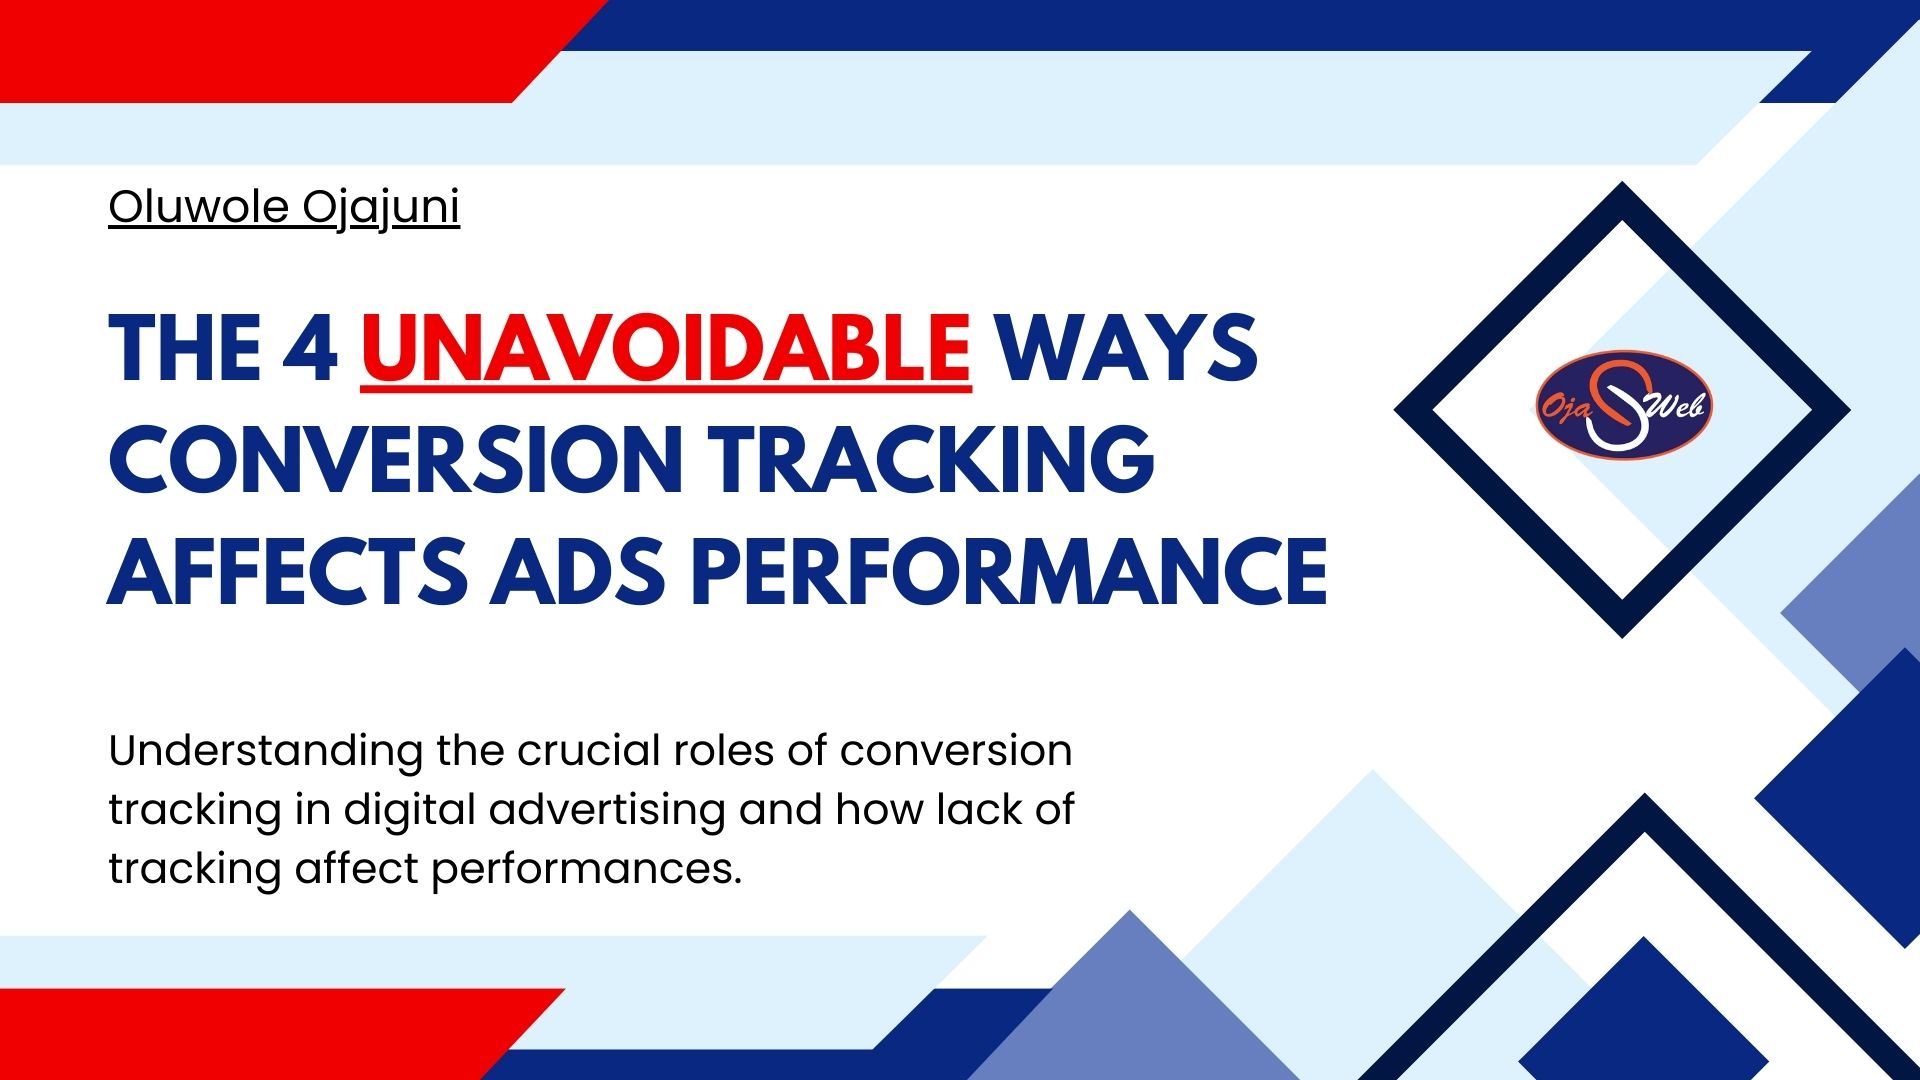 How Conversion Tracking Affects Ads Performance